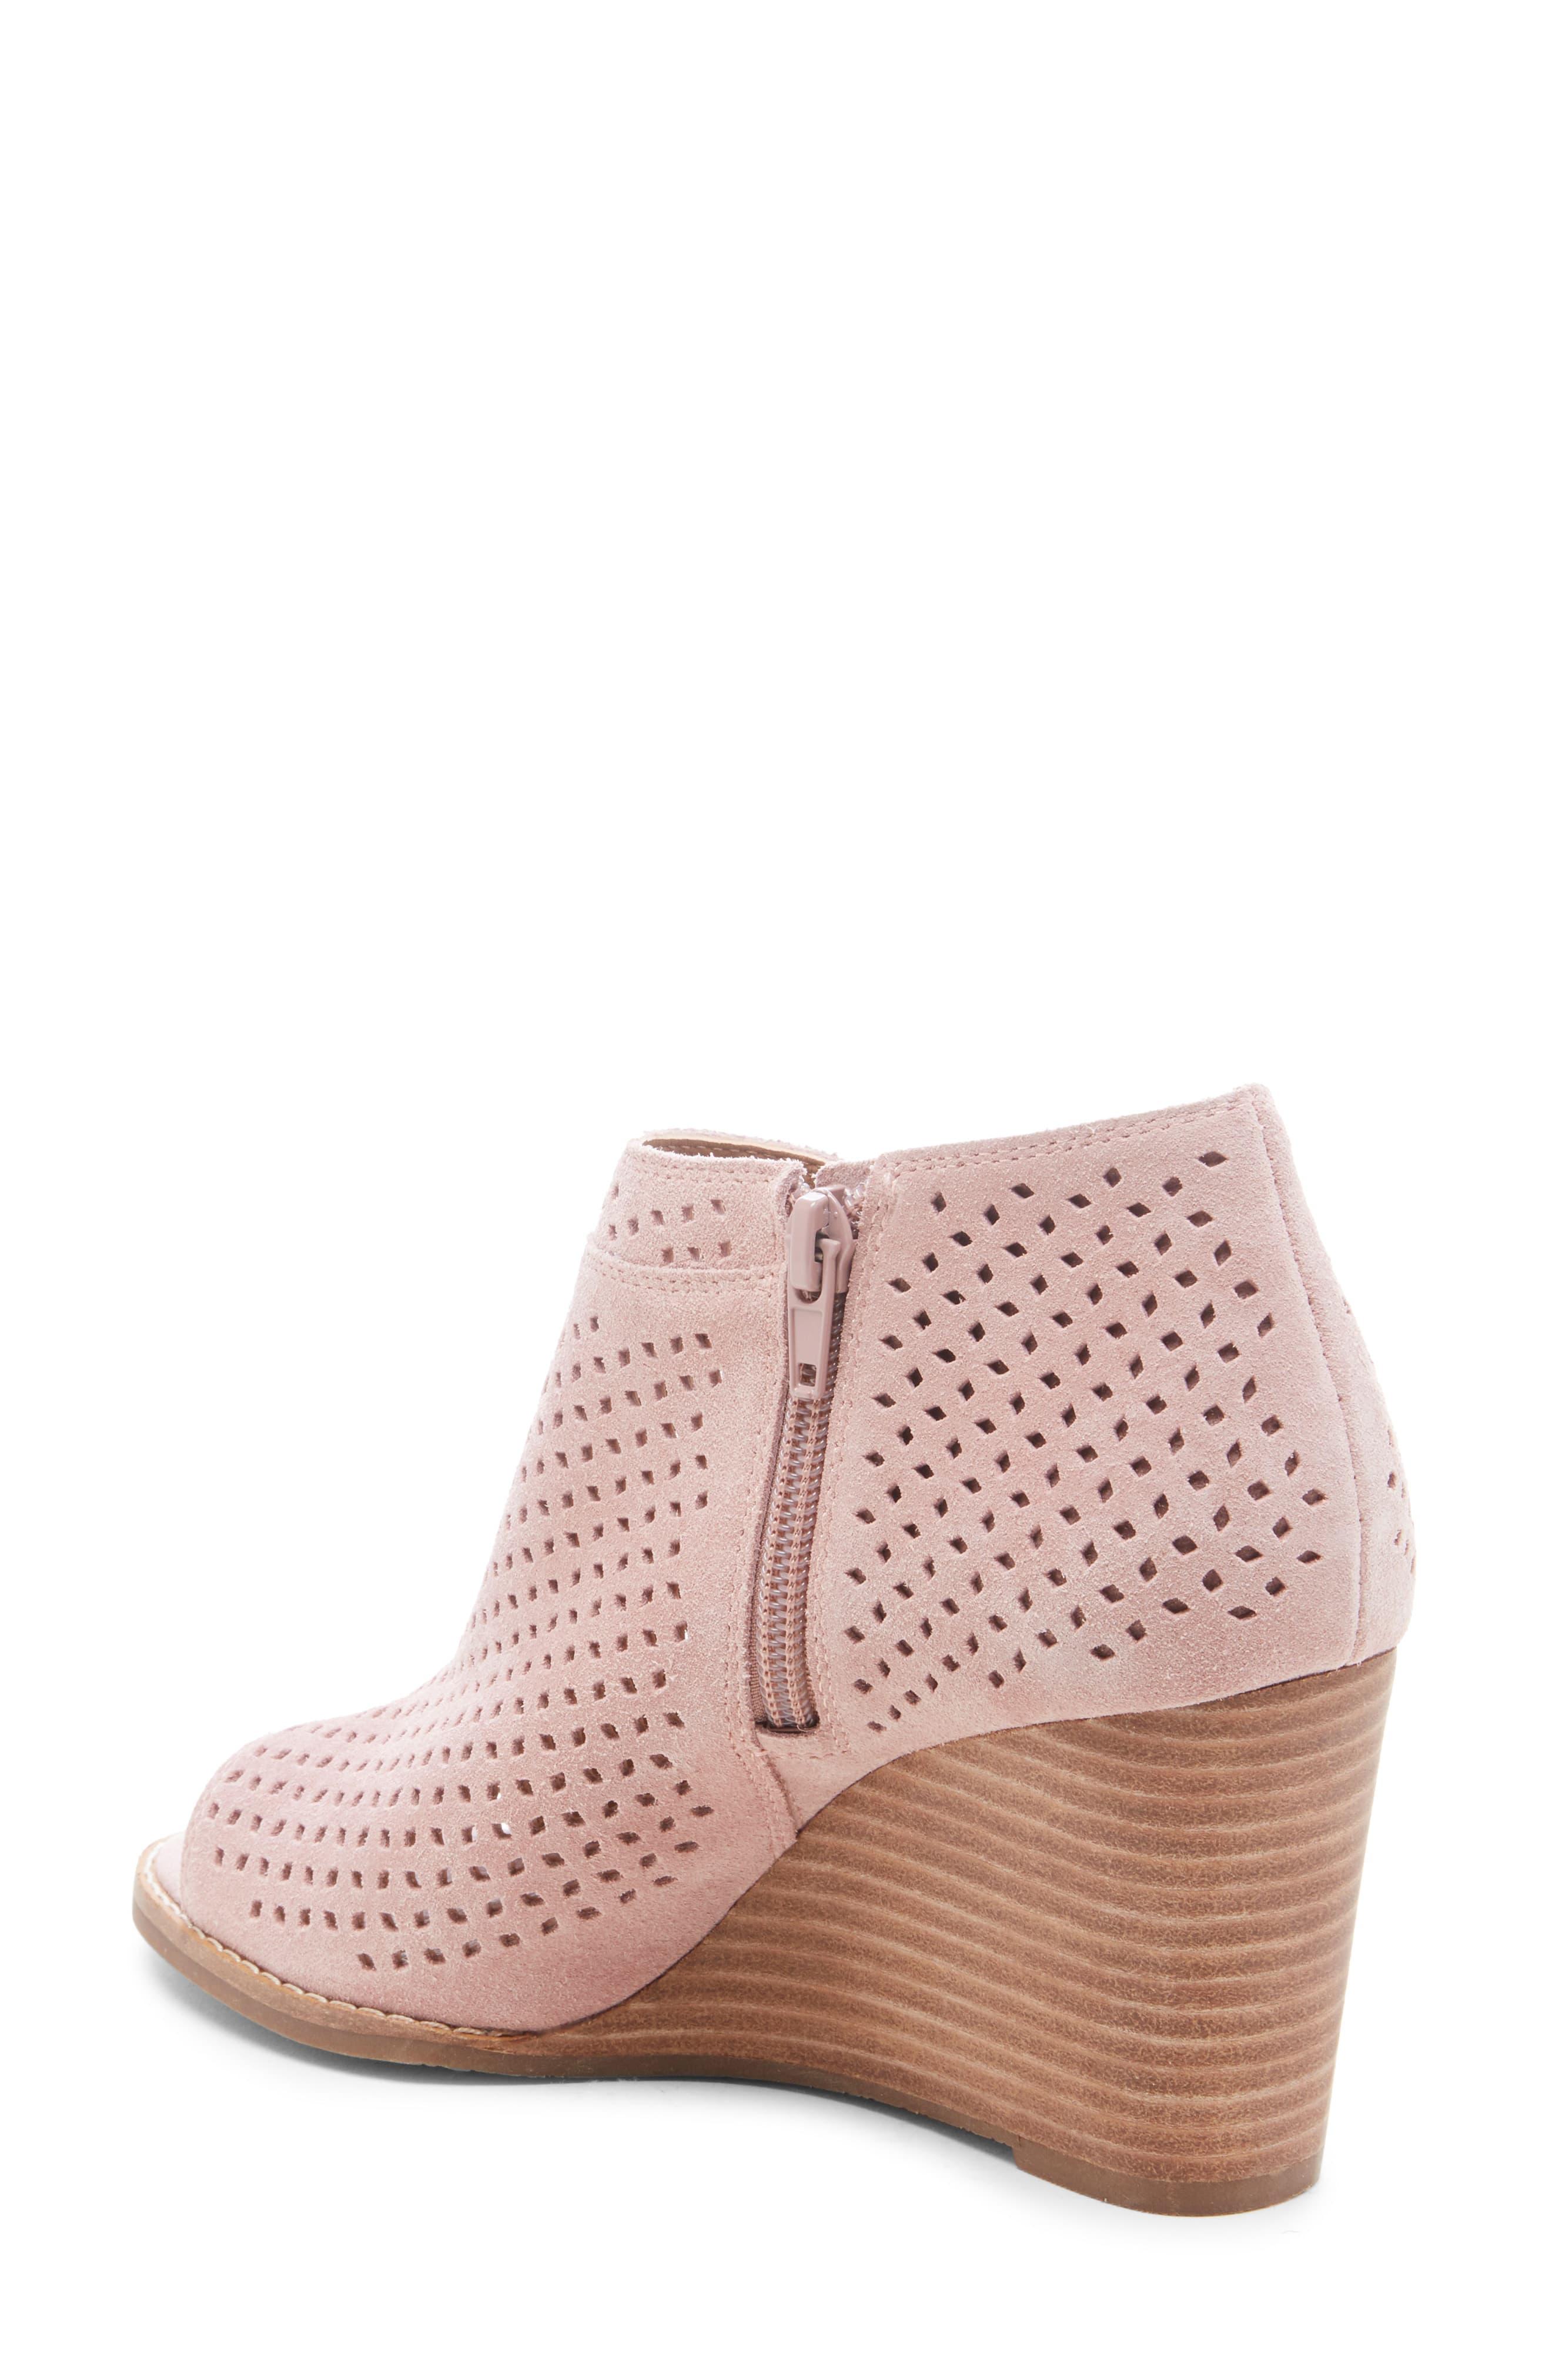 Lucky Brand Jazley in Blush Suede (Pink 